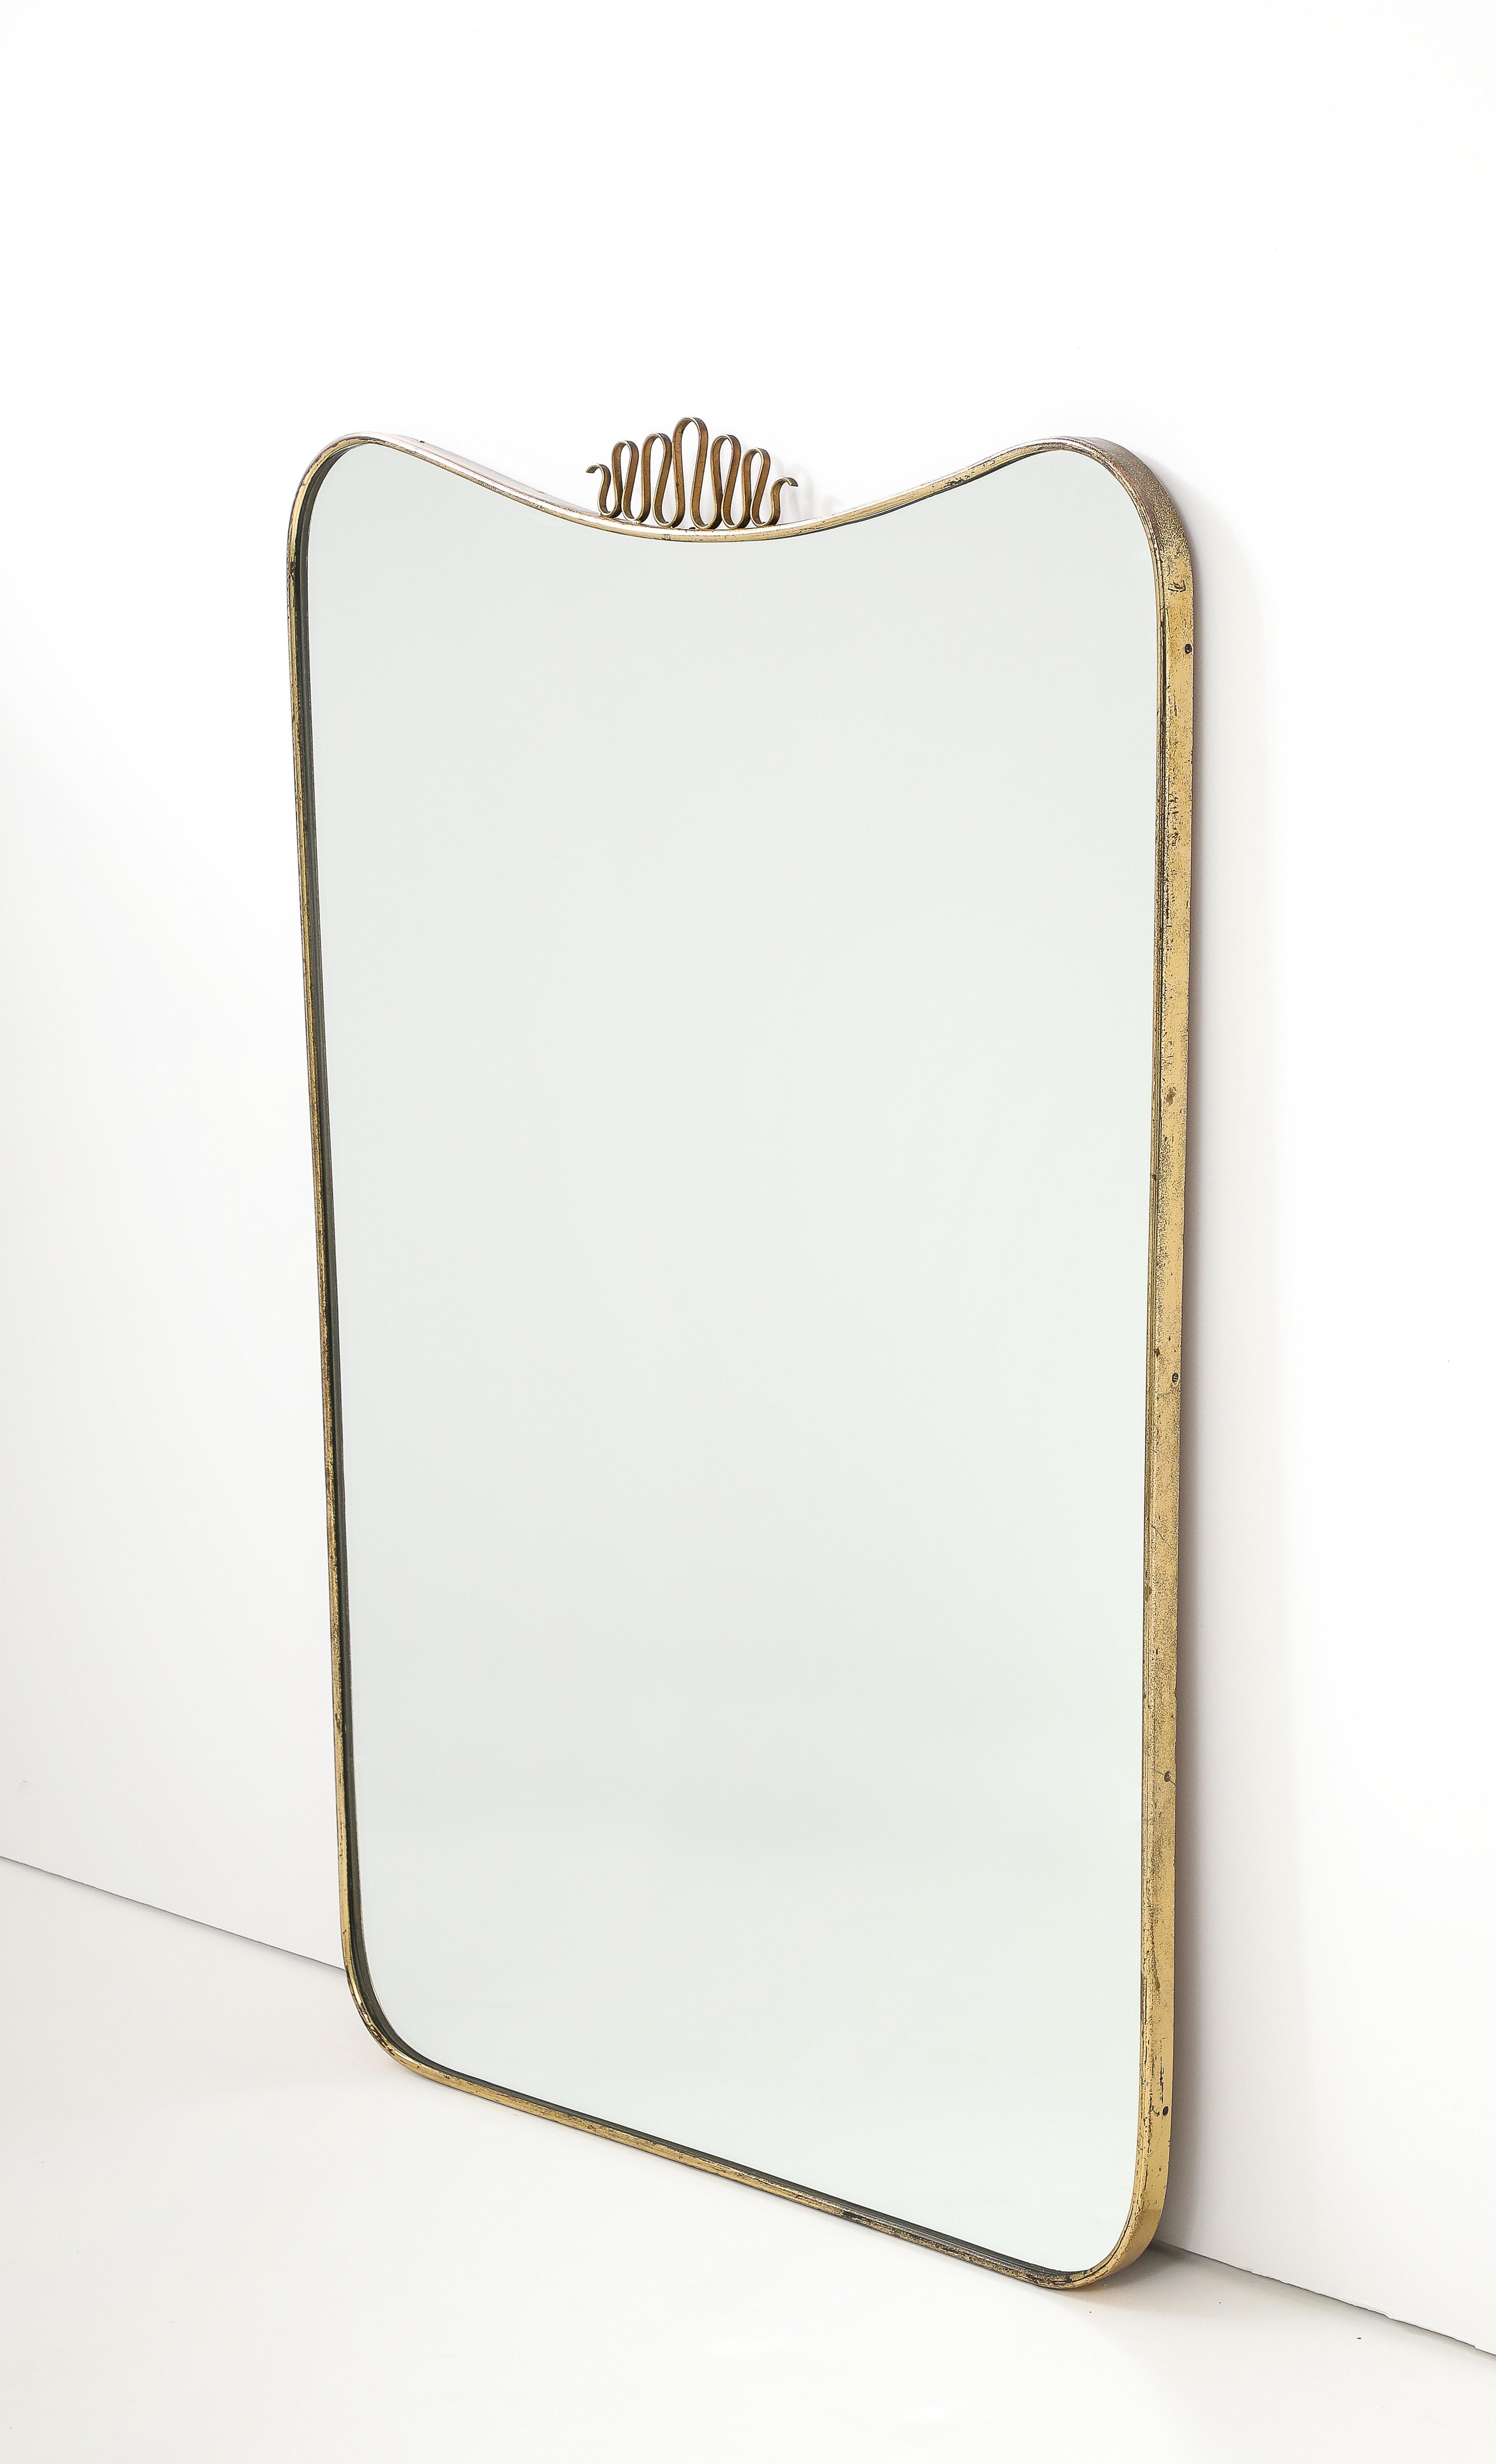 Mid-Century Modern Midcentury Italian Modernist Scroll Top Brass Mirror in the Style of Gio Ponti For Sale